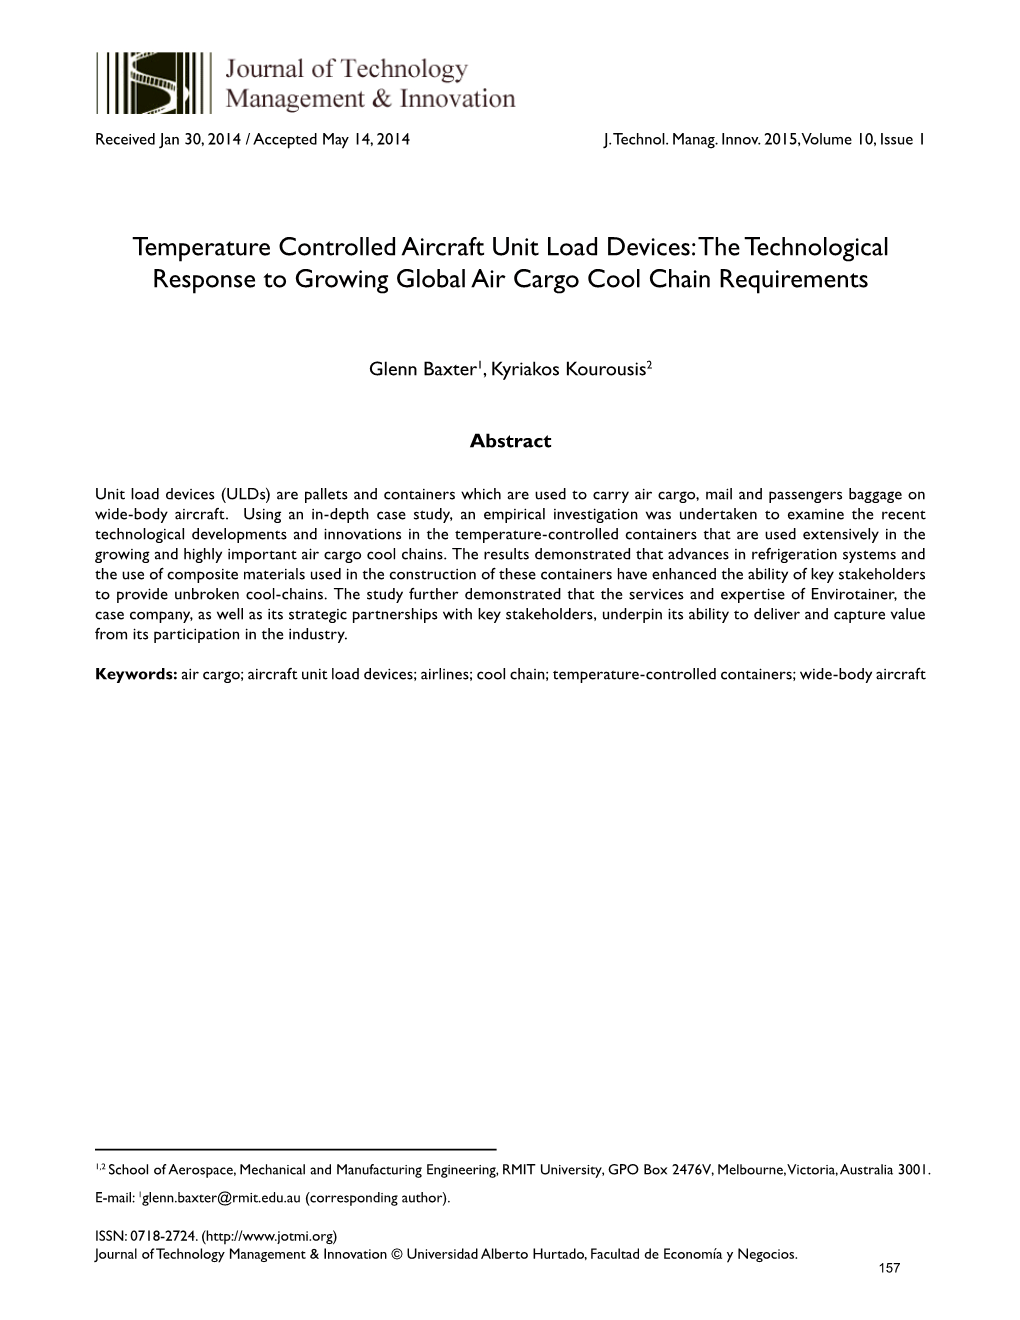 Temperature Controlled Aircraft Unit Load Devices: the Technological Response to Growing Global Air Cargo Cool Chain Requirements